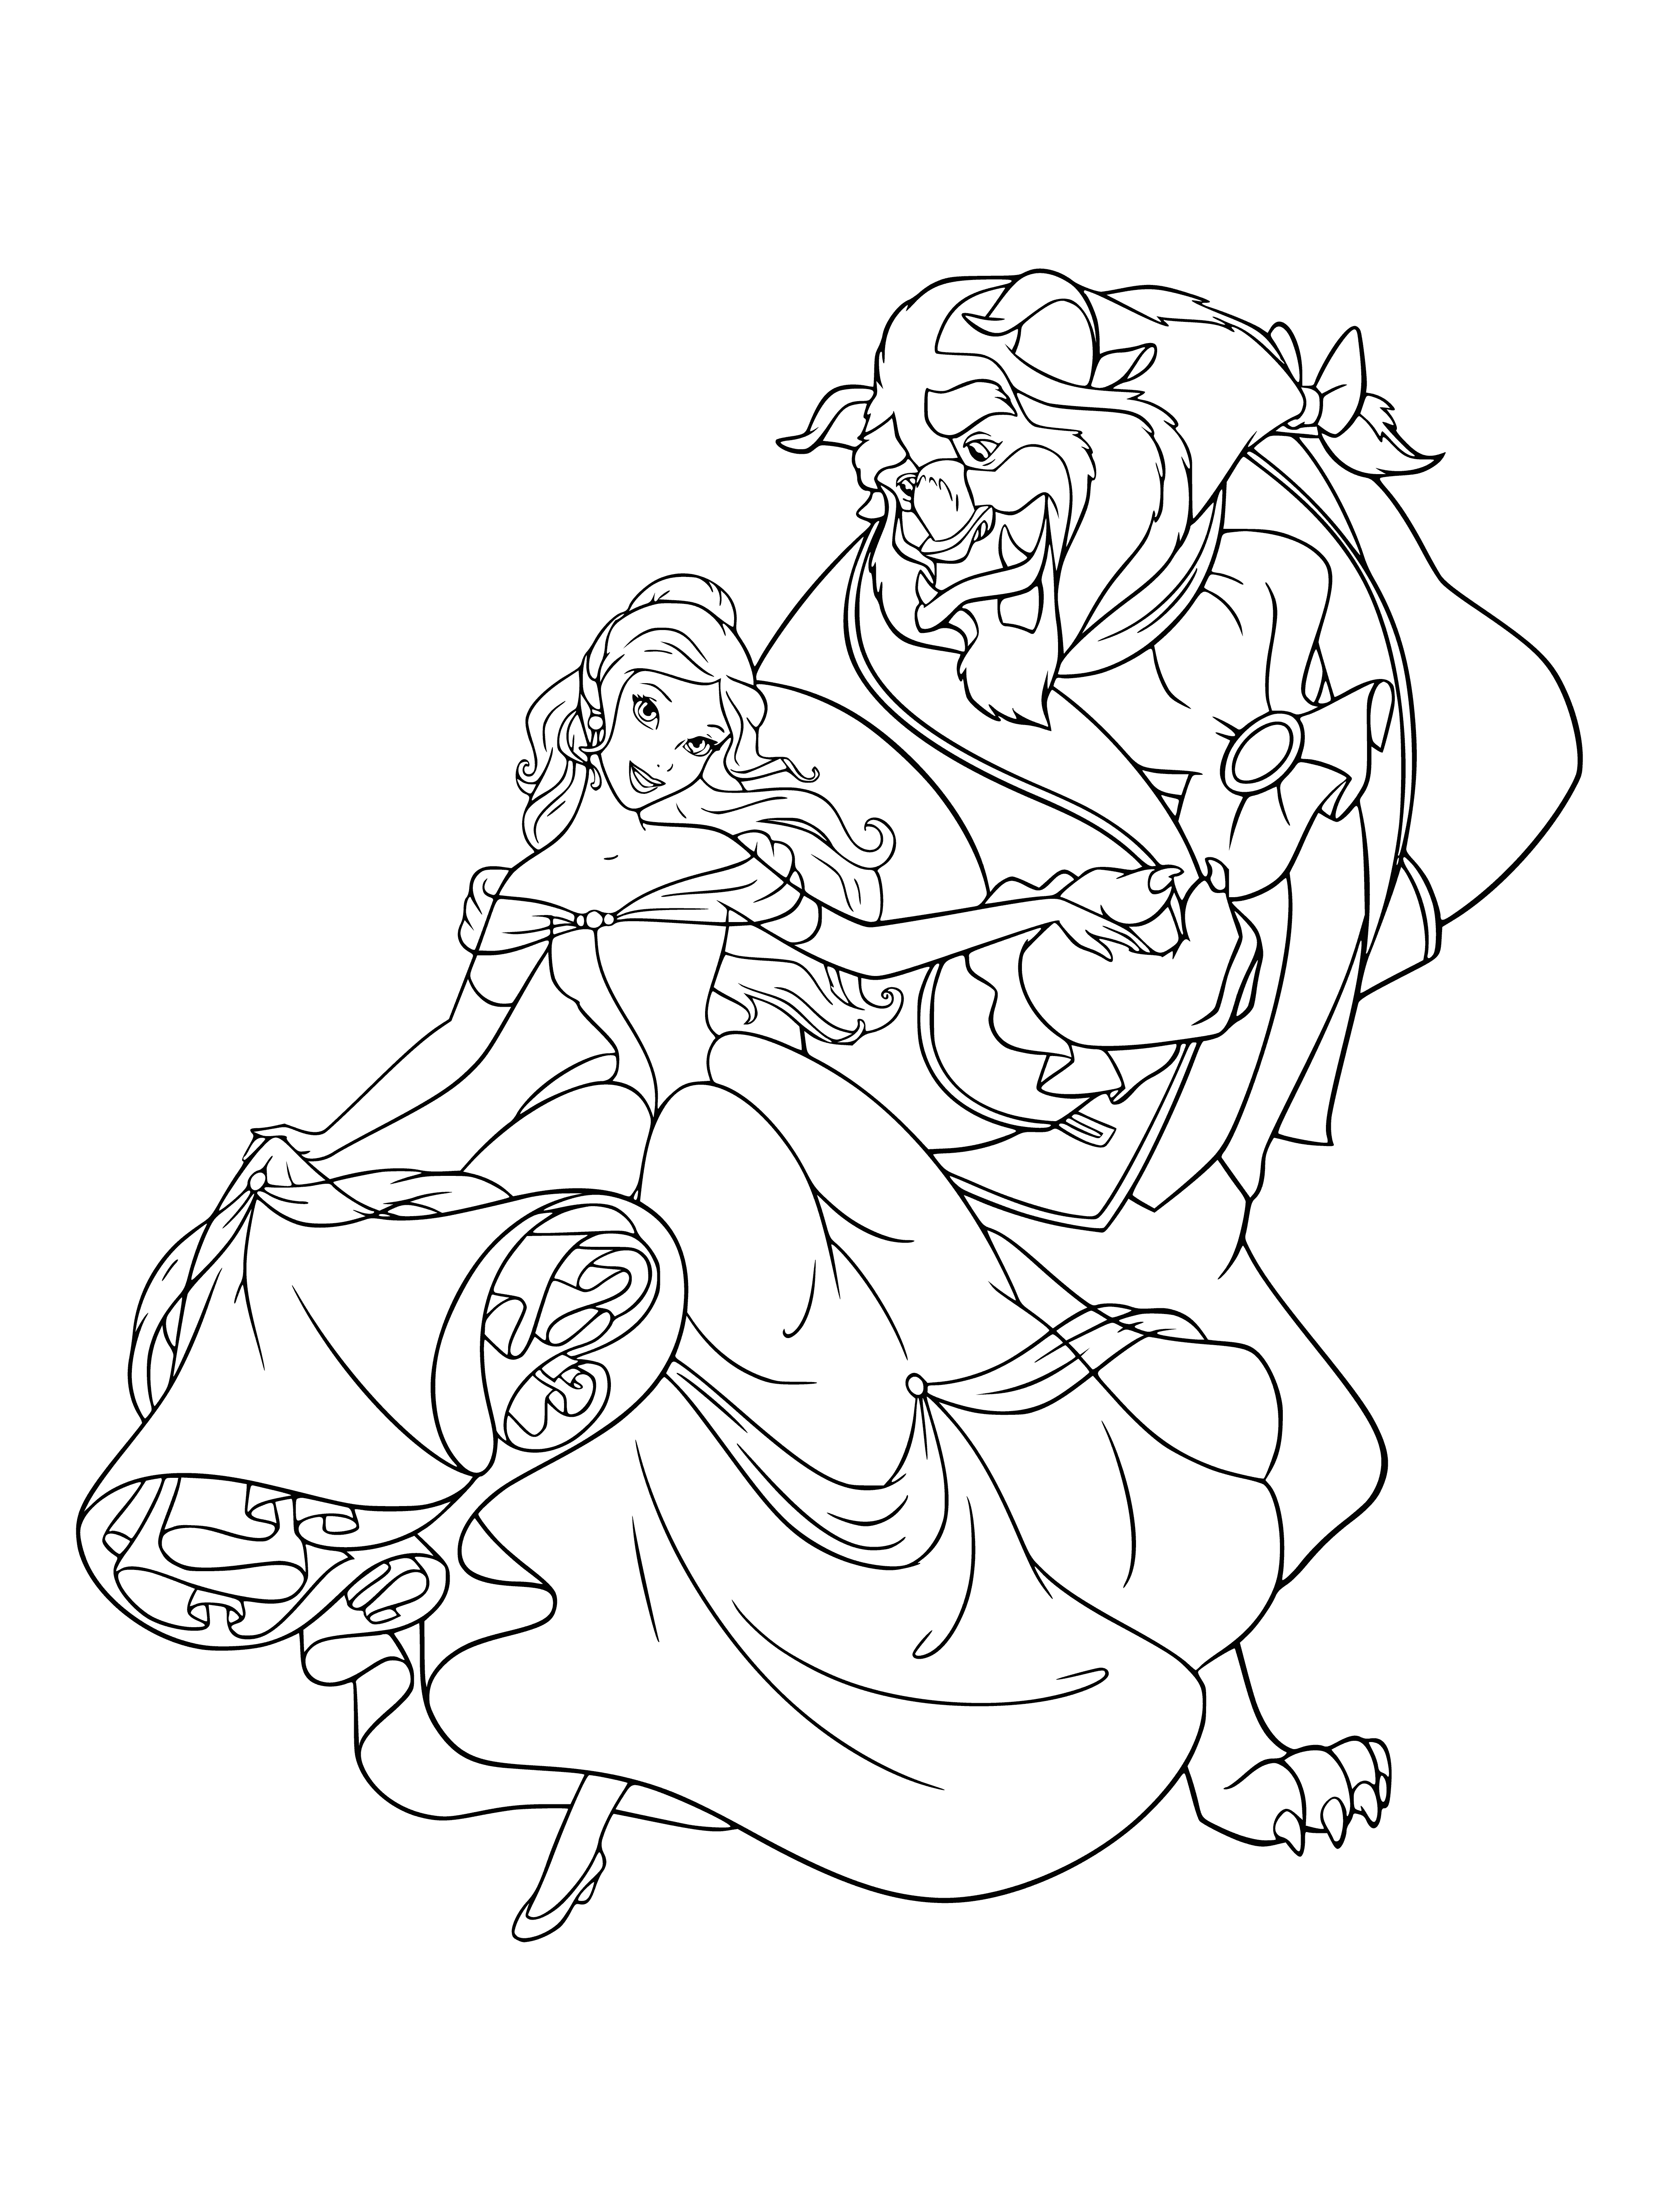 coloring page: A beautiful woman is looking at a rose, smiling, while a brown furry beast watches from behind.